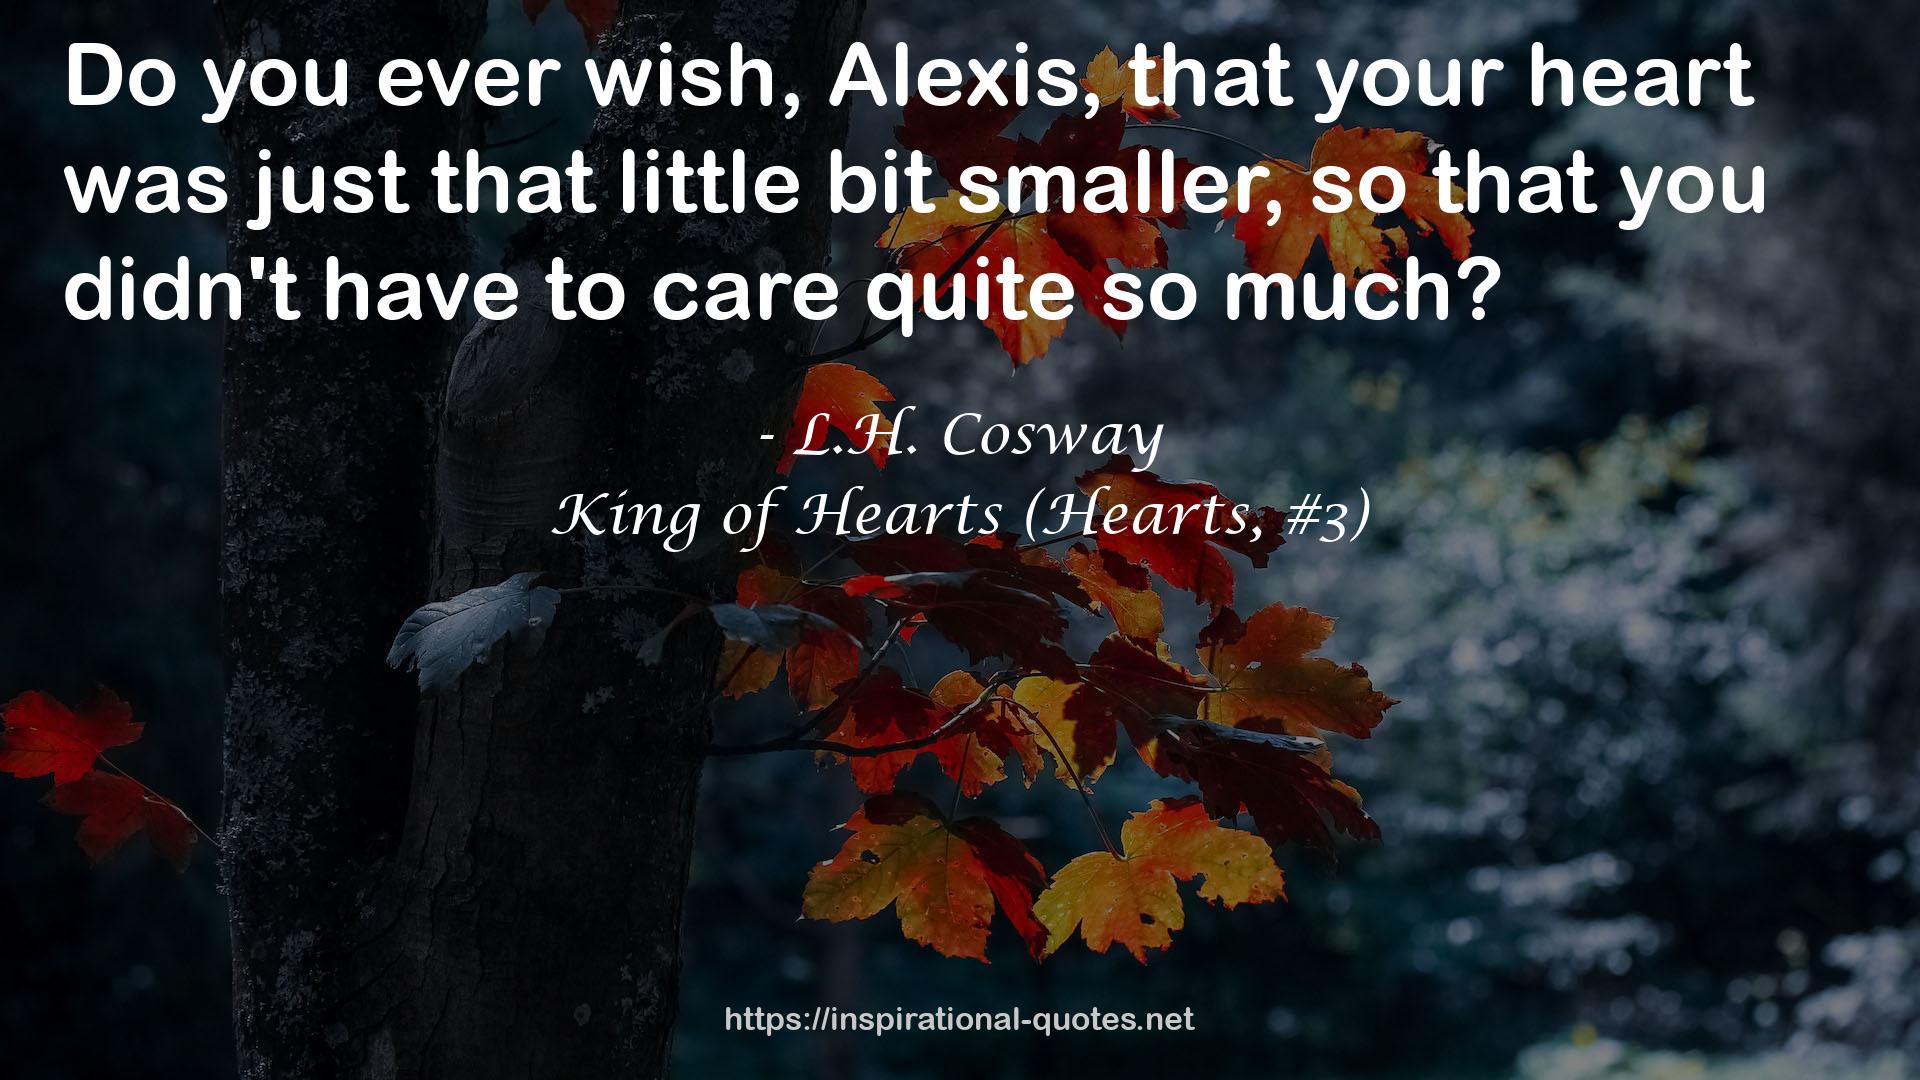 King of Hearts (Hearts, #3) QUOTES